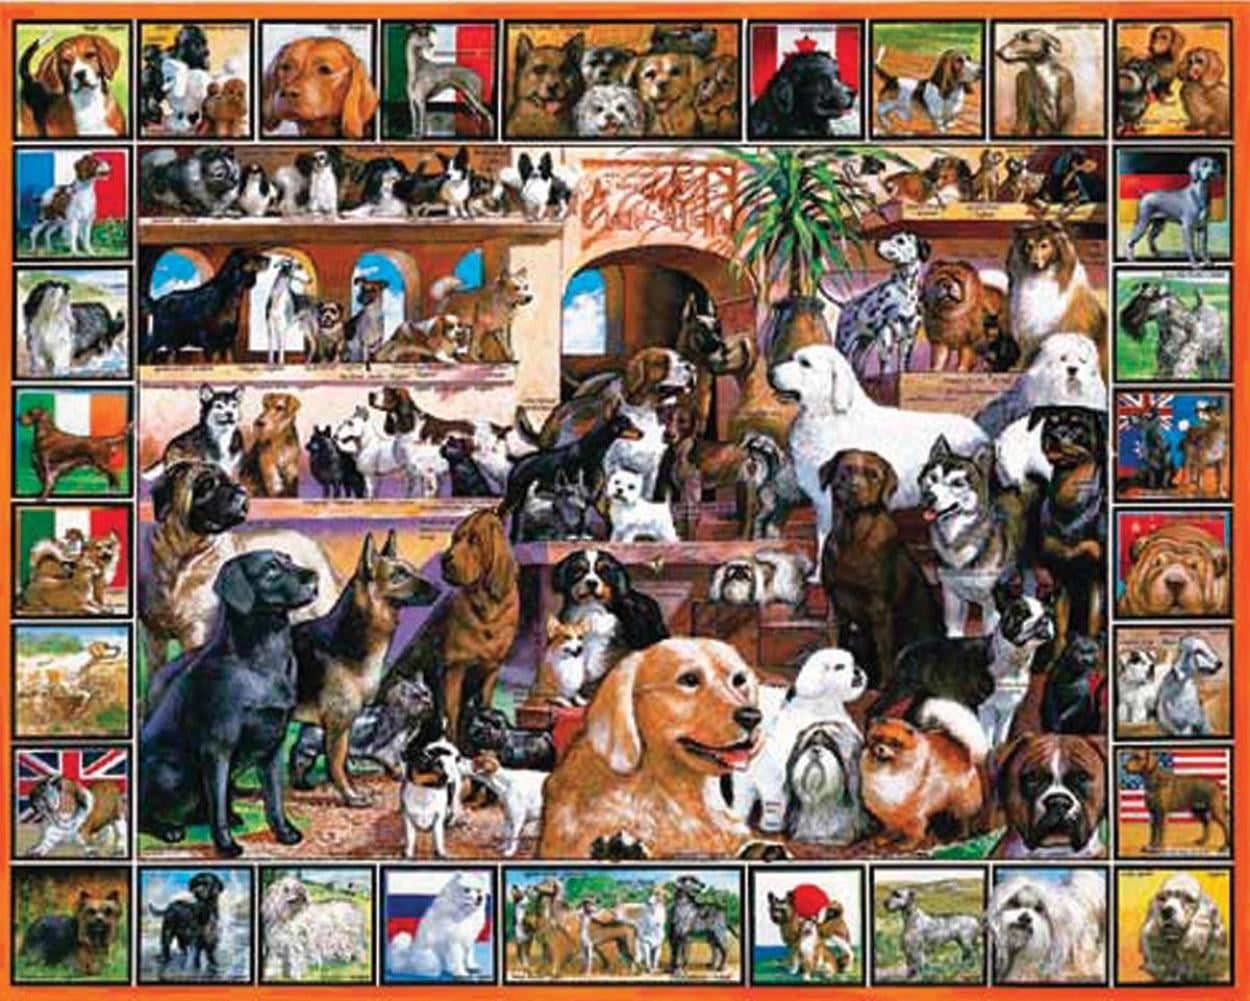 World of Dogs - 1000 Piece Jigsaw Puzzle, DOG BREEDS: Every popular